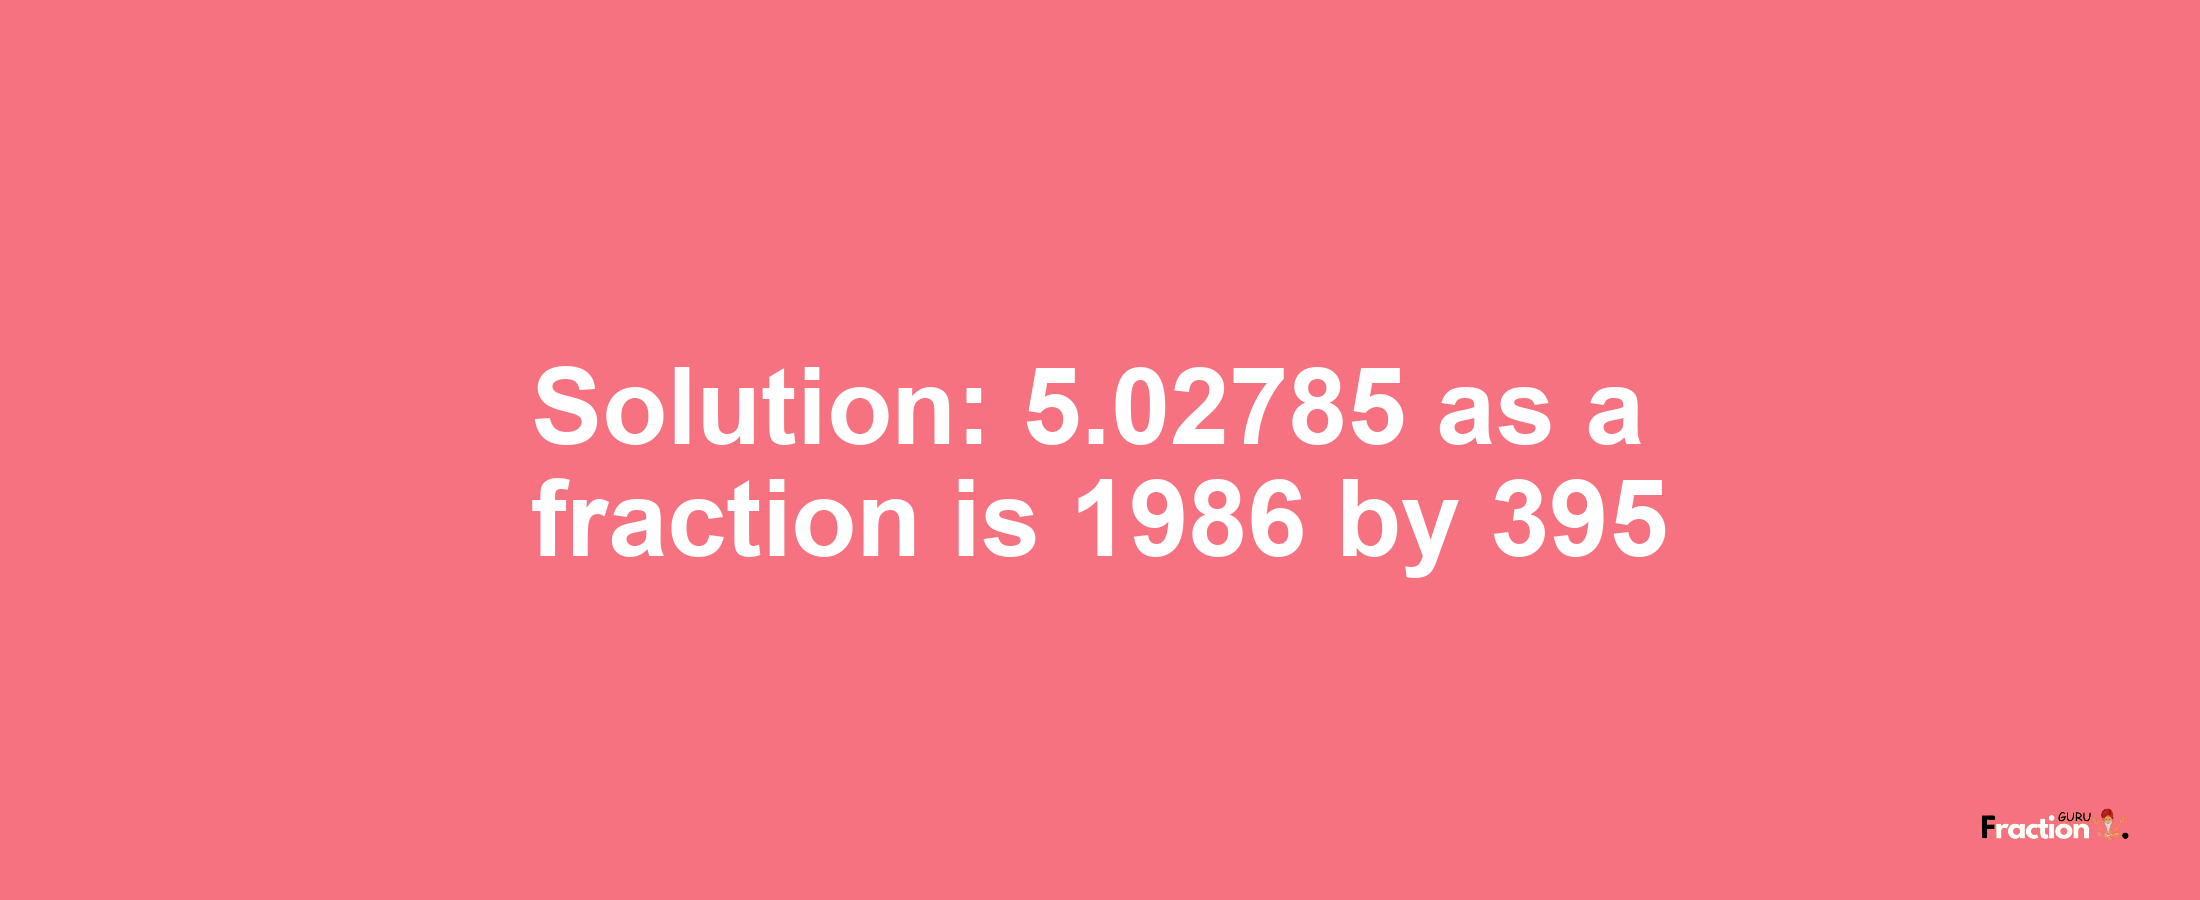 Solution:5.02785 as a fraction is 1986/395